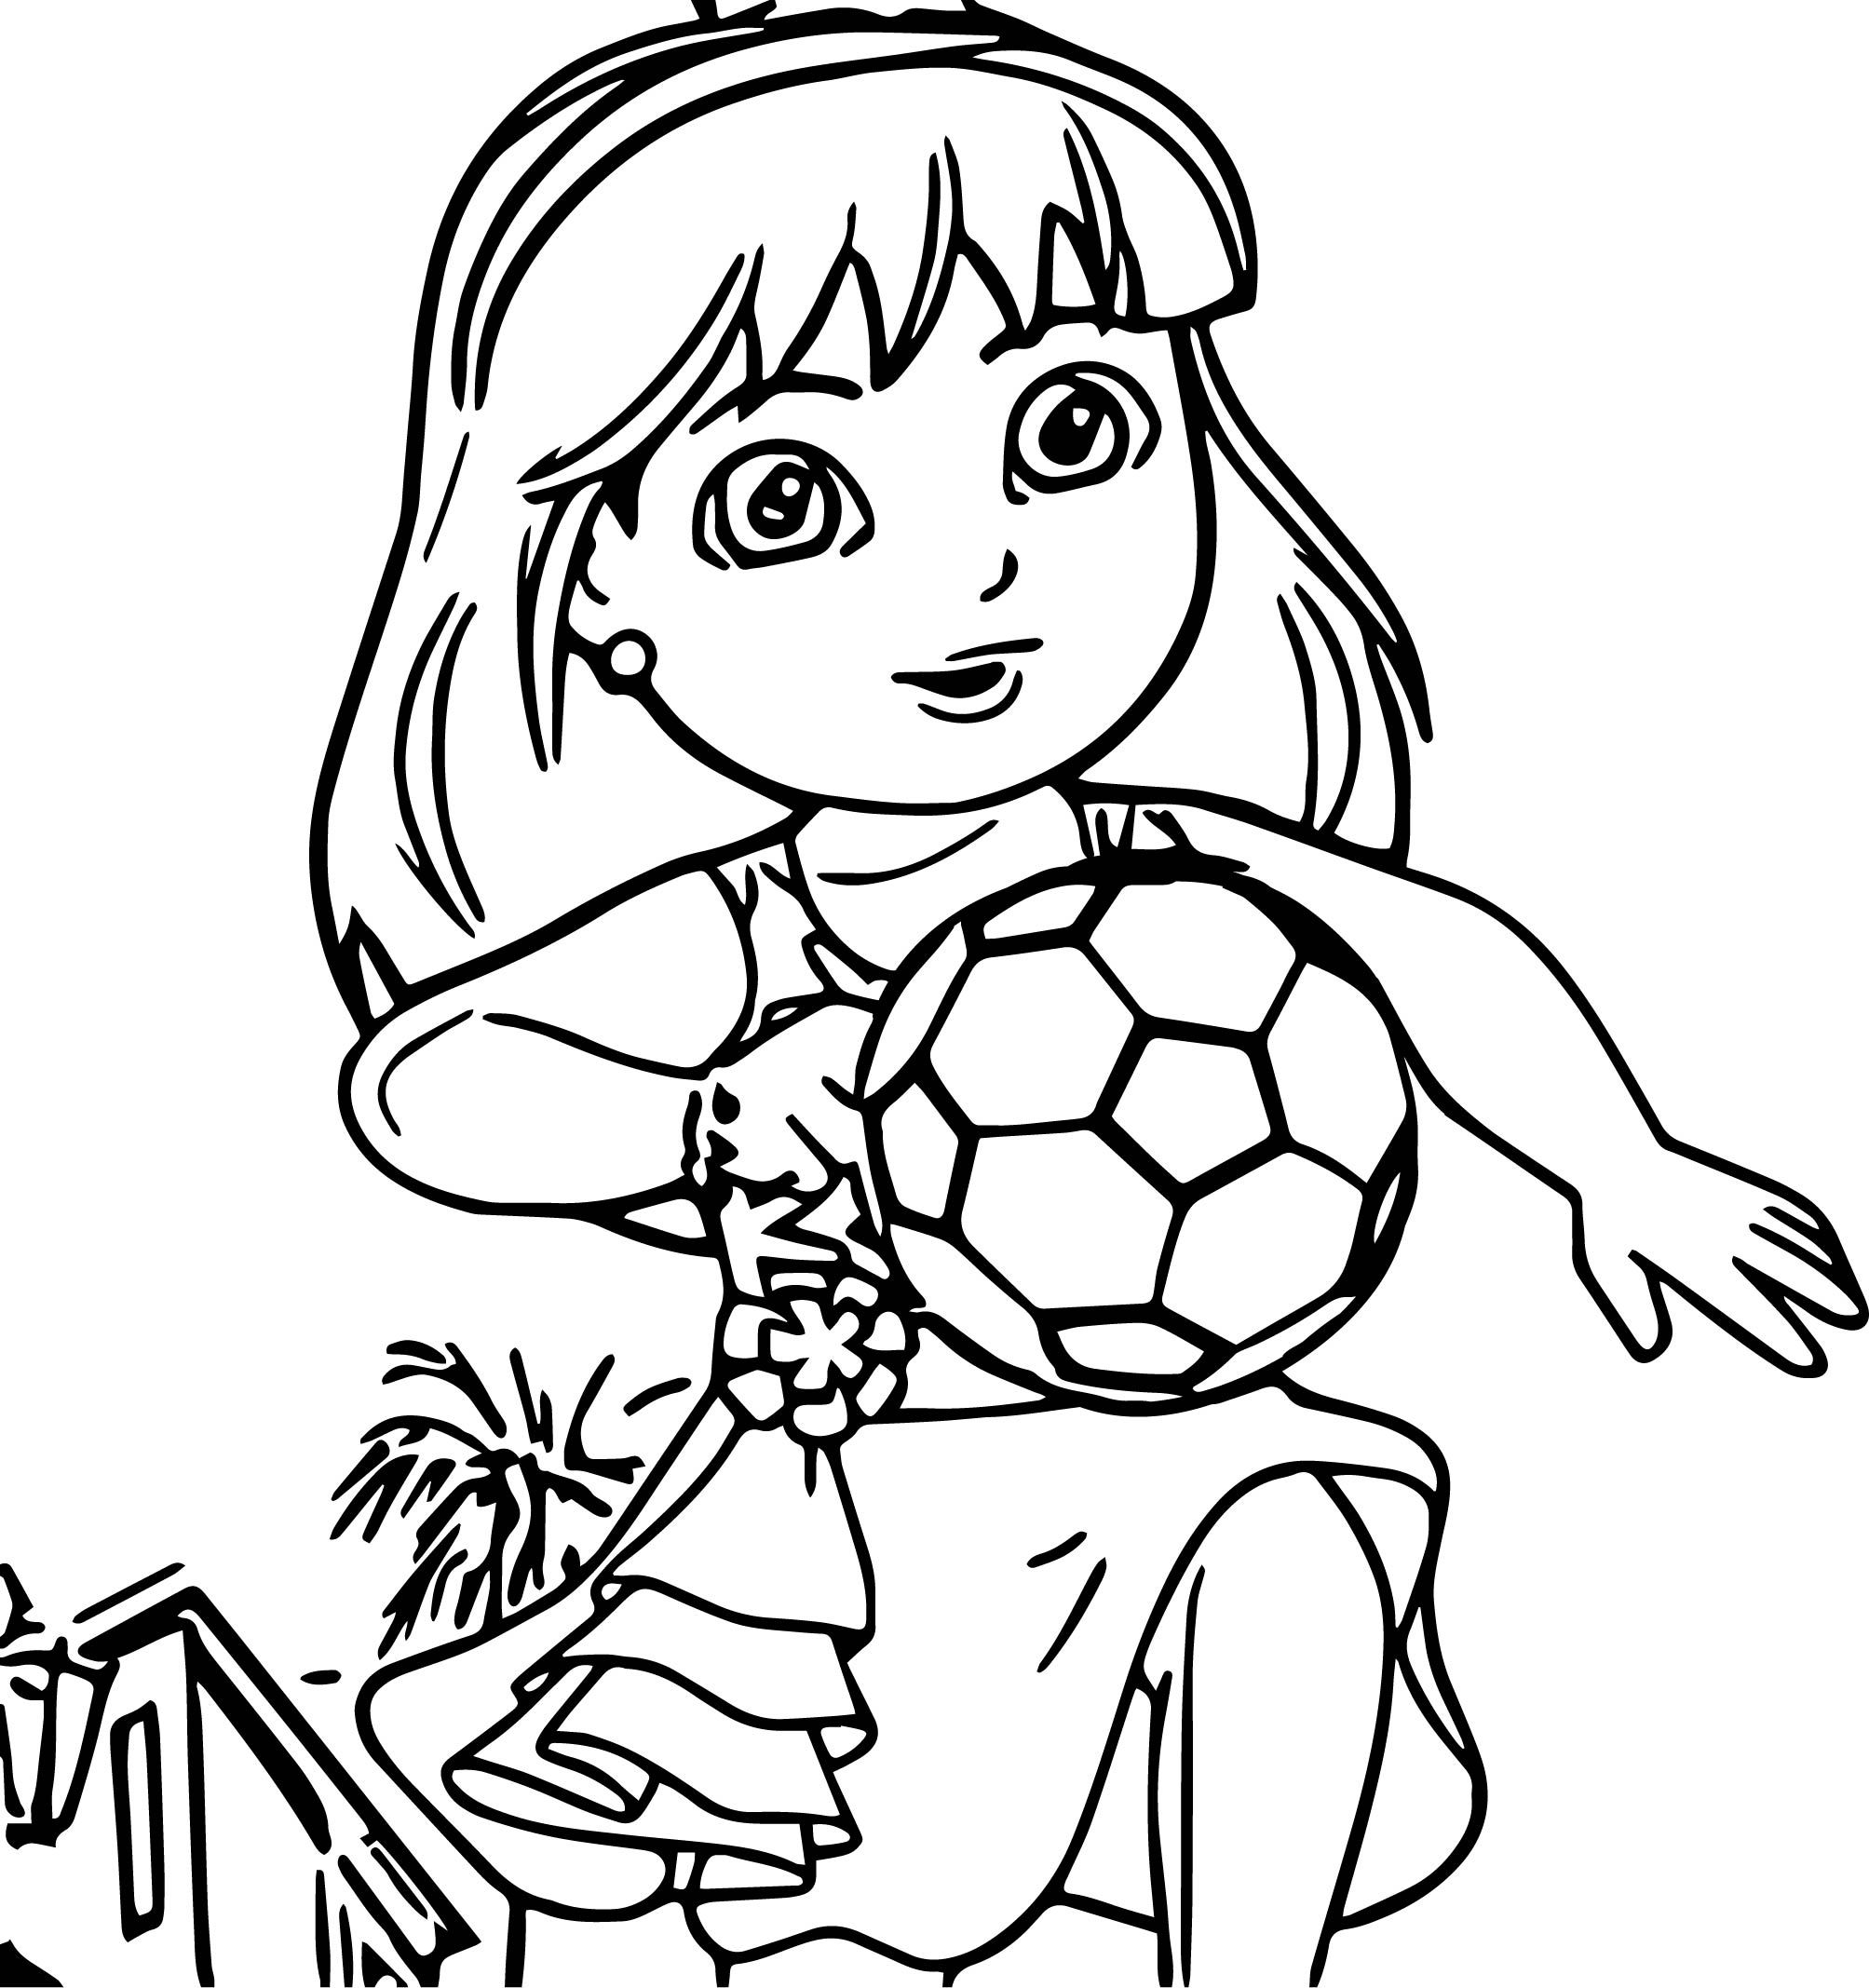 Get A Move On Dora And Friends Soccer Dance Coloring Page ...